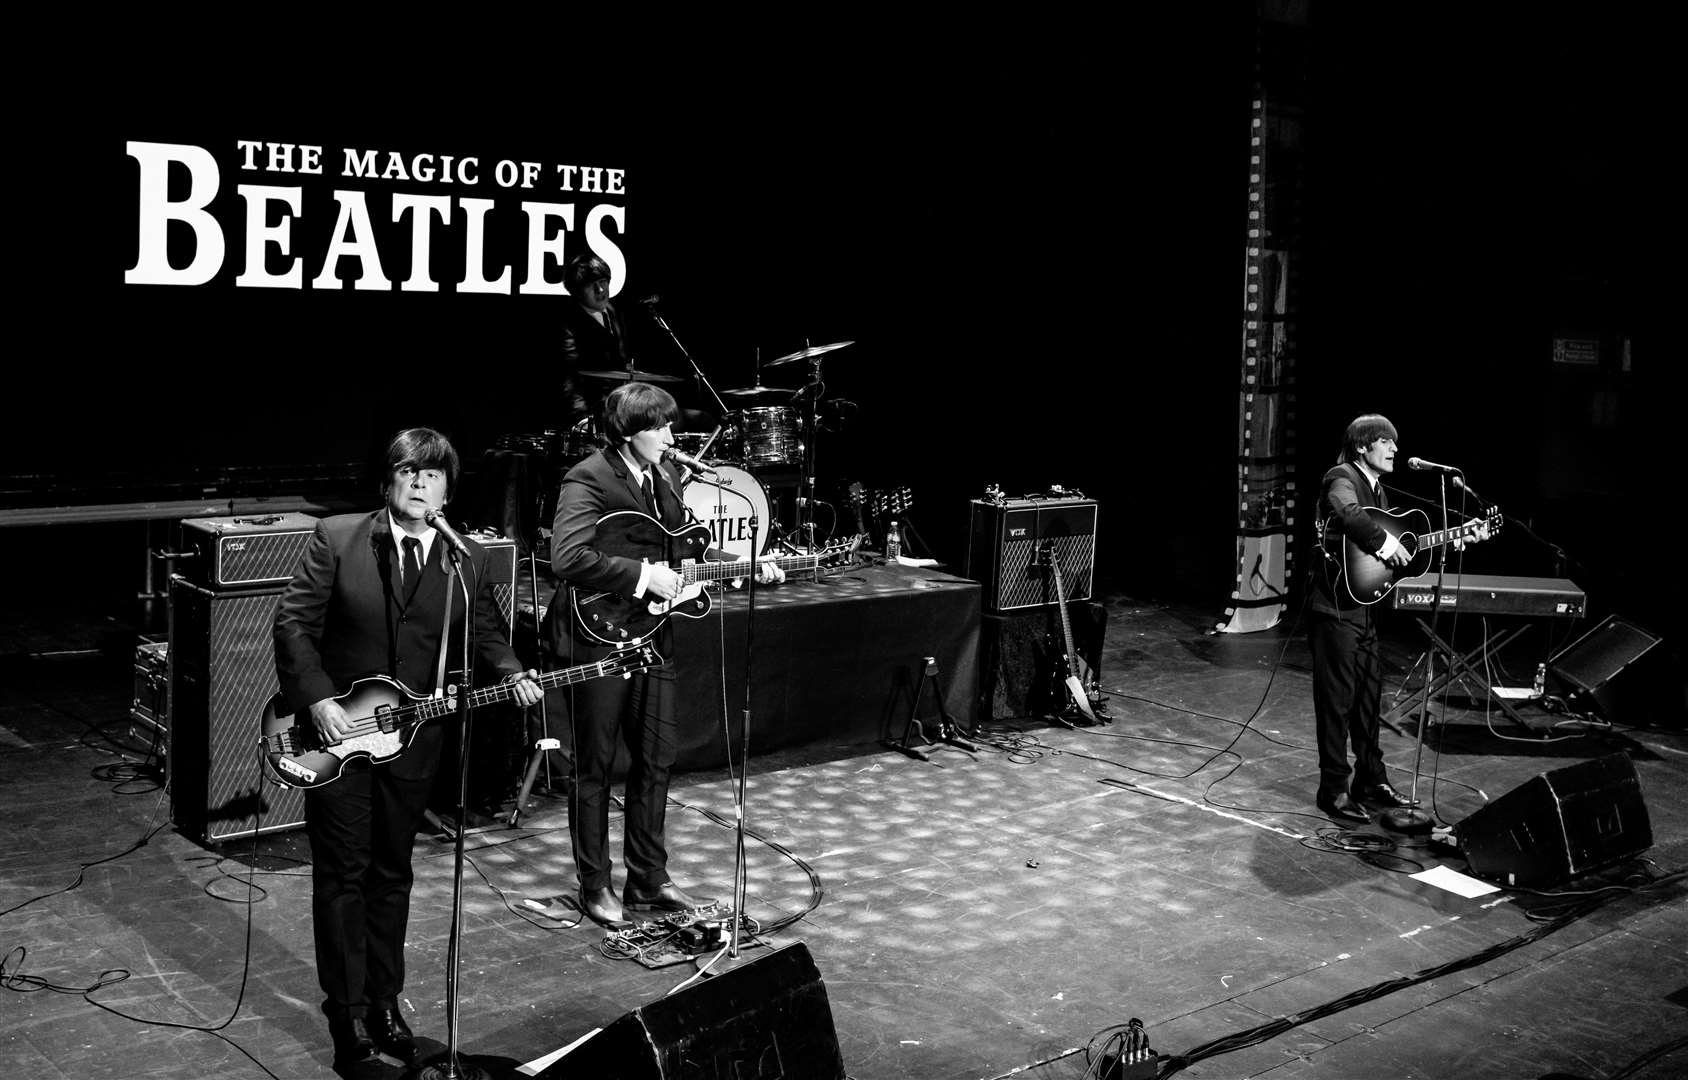 The Magic of the Beatles comes to the P&J Live.